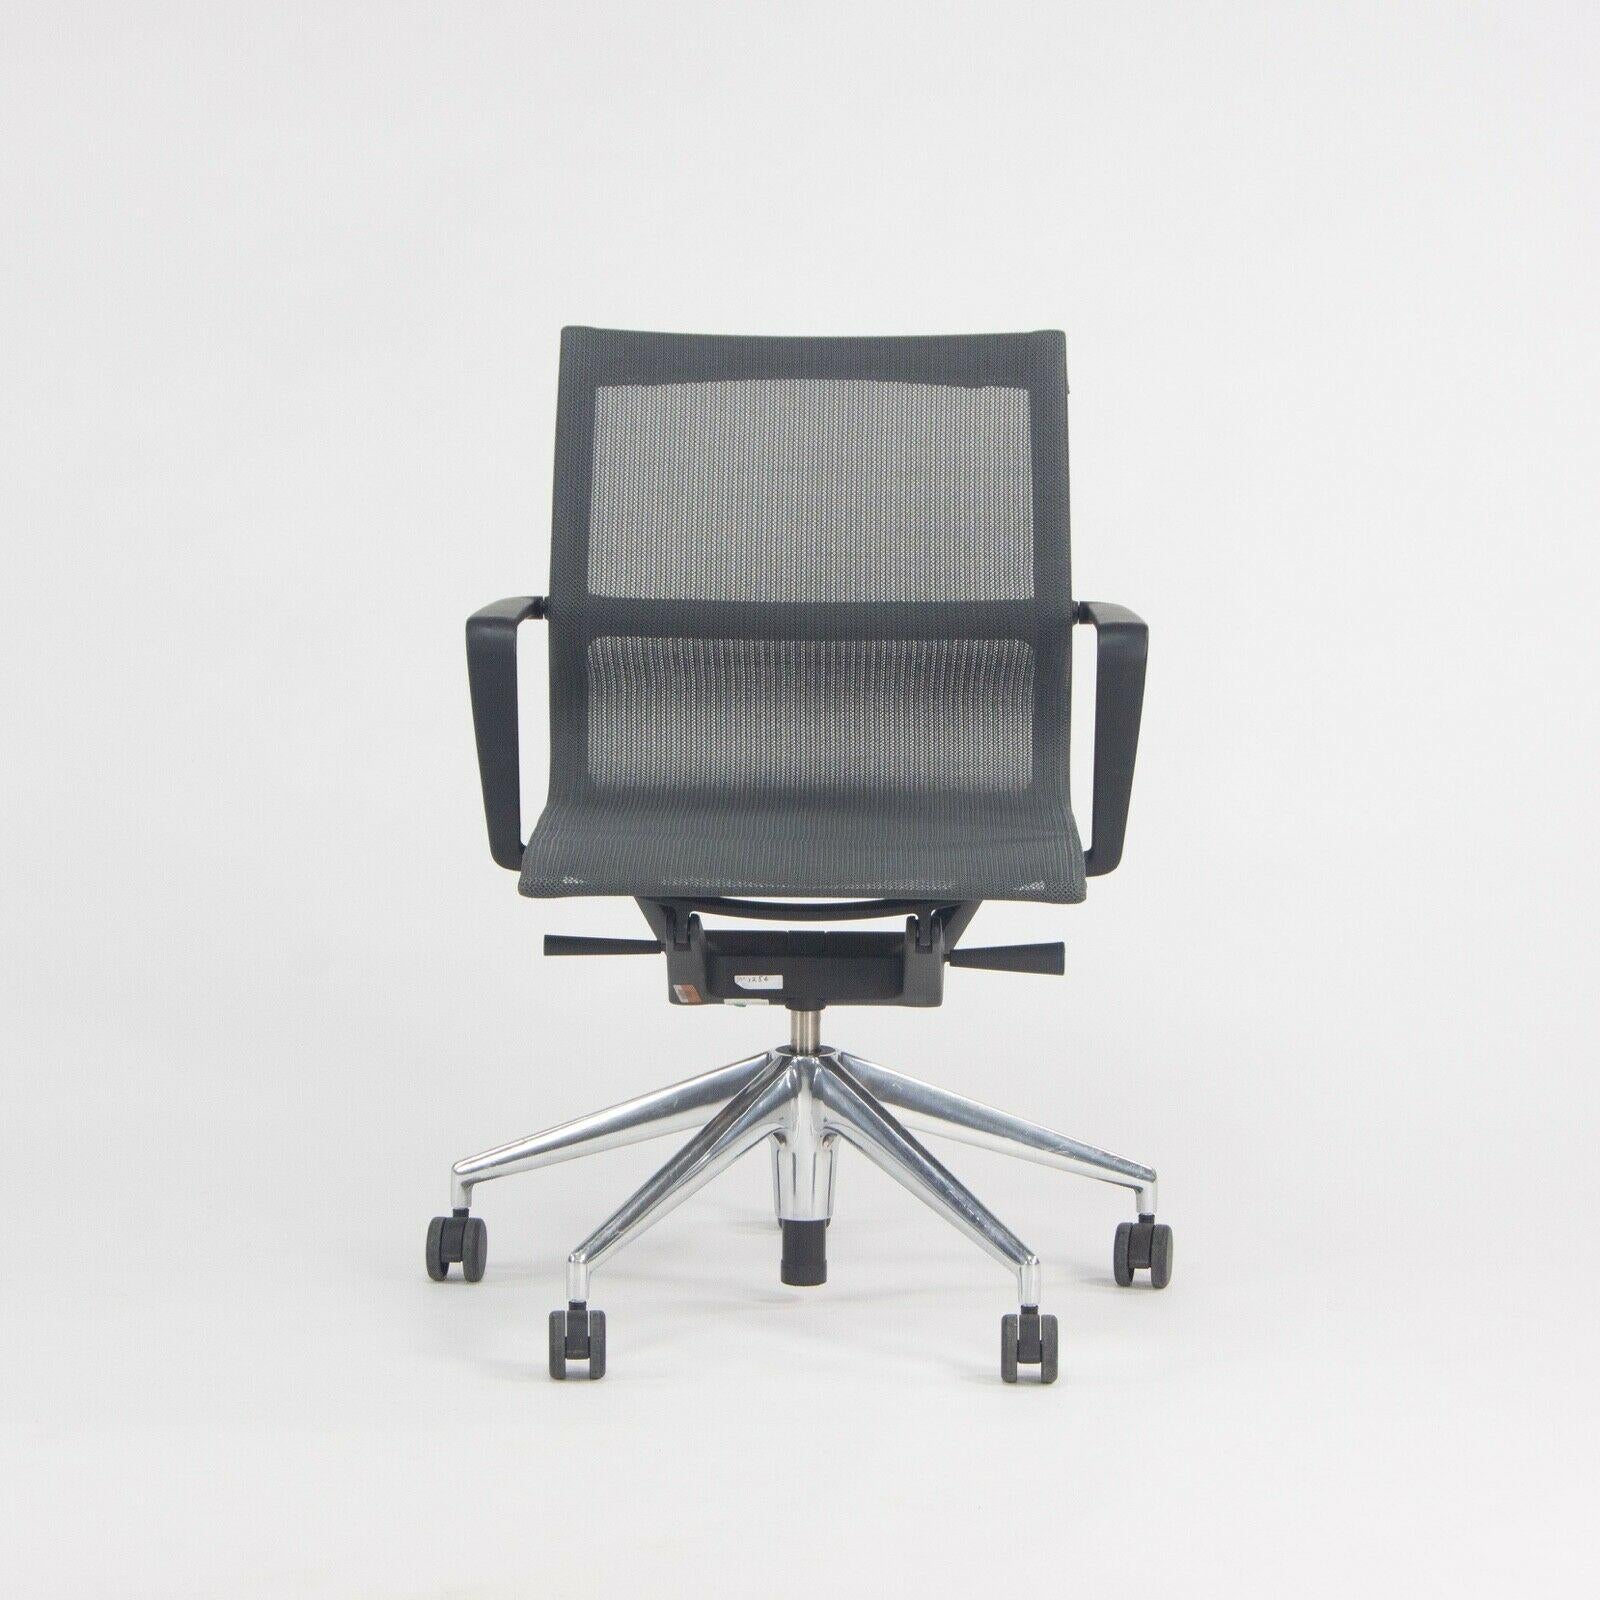 Modern 2018 Vitra Physix Rolling Desk Chair by Alberta Meda Gray Mesh Sets Available For Sale